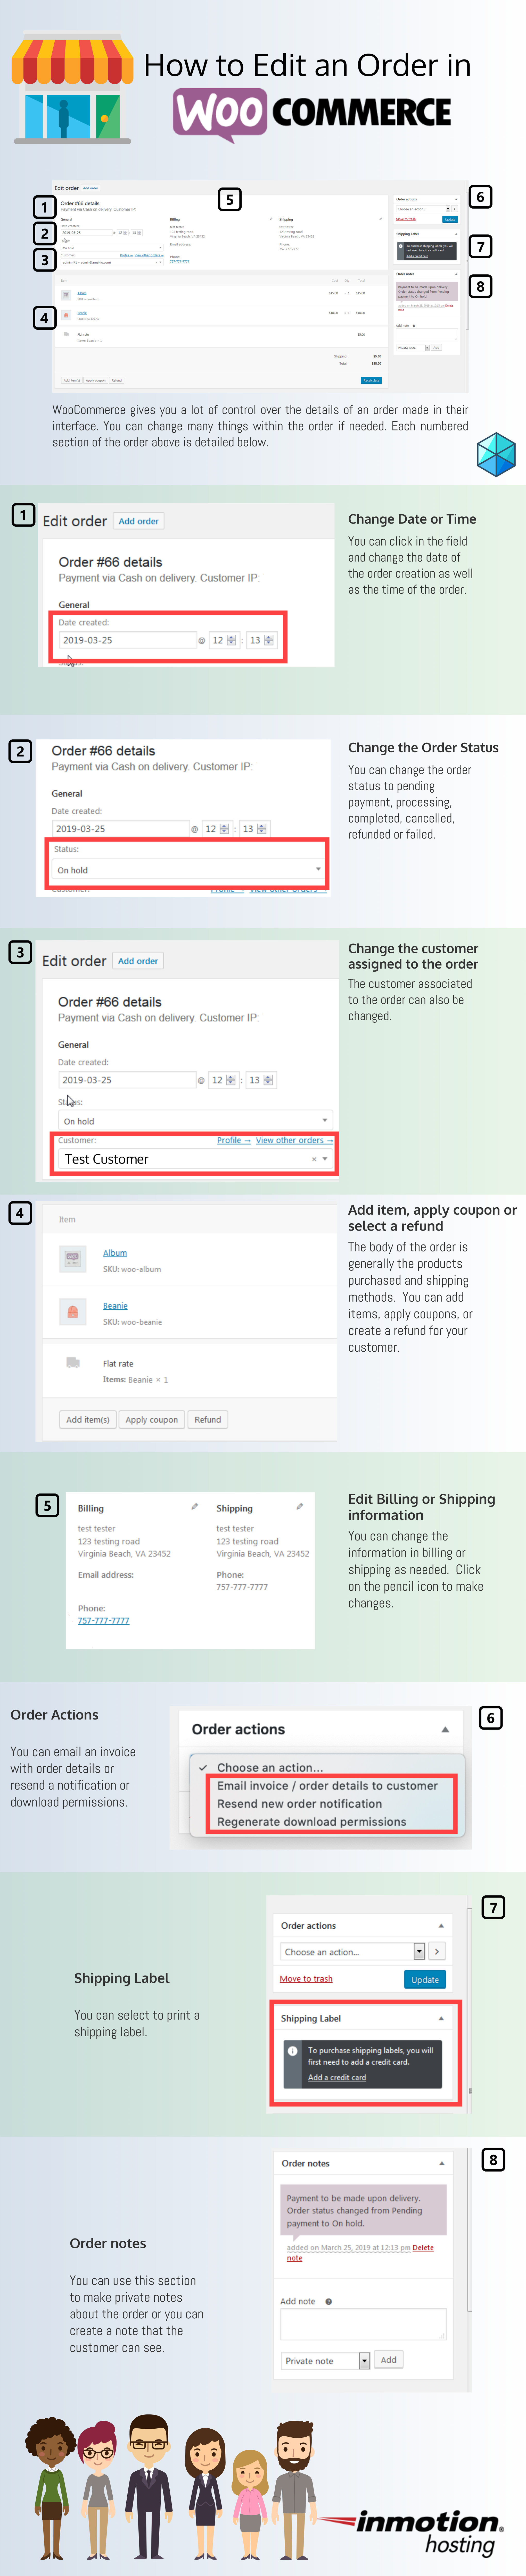 Infographic about editing a WooCommerce order